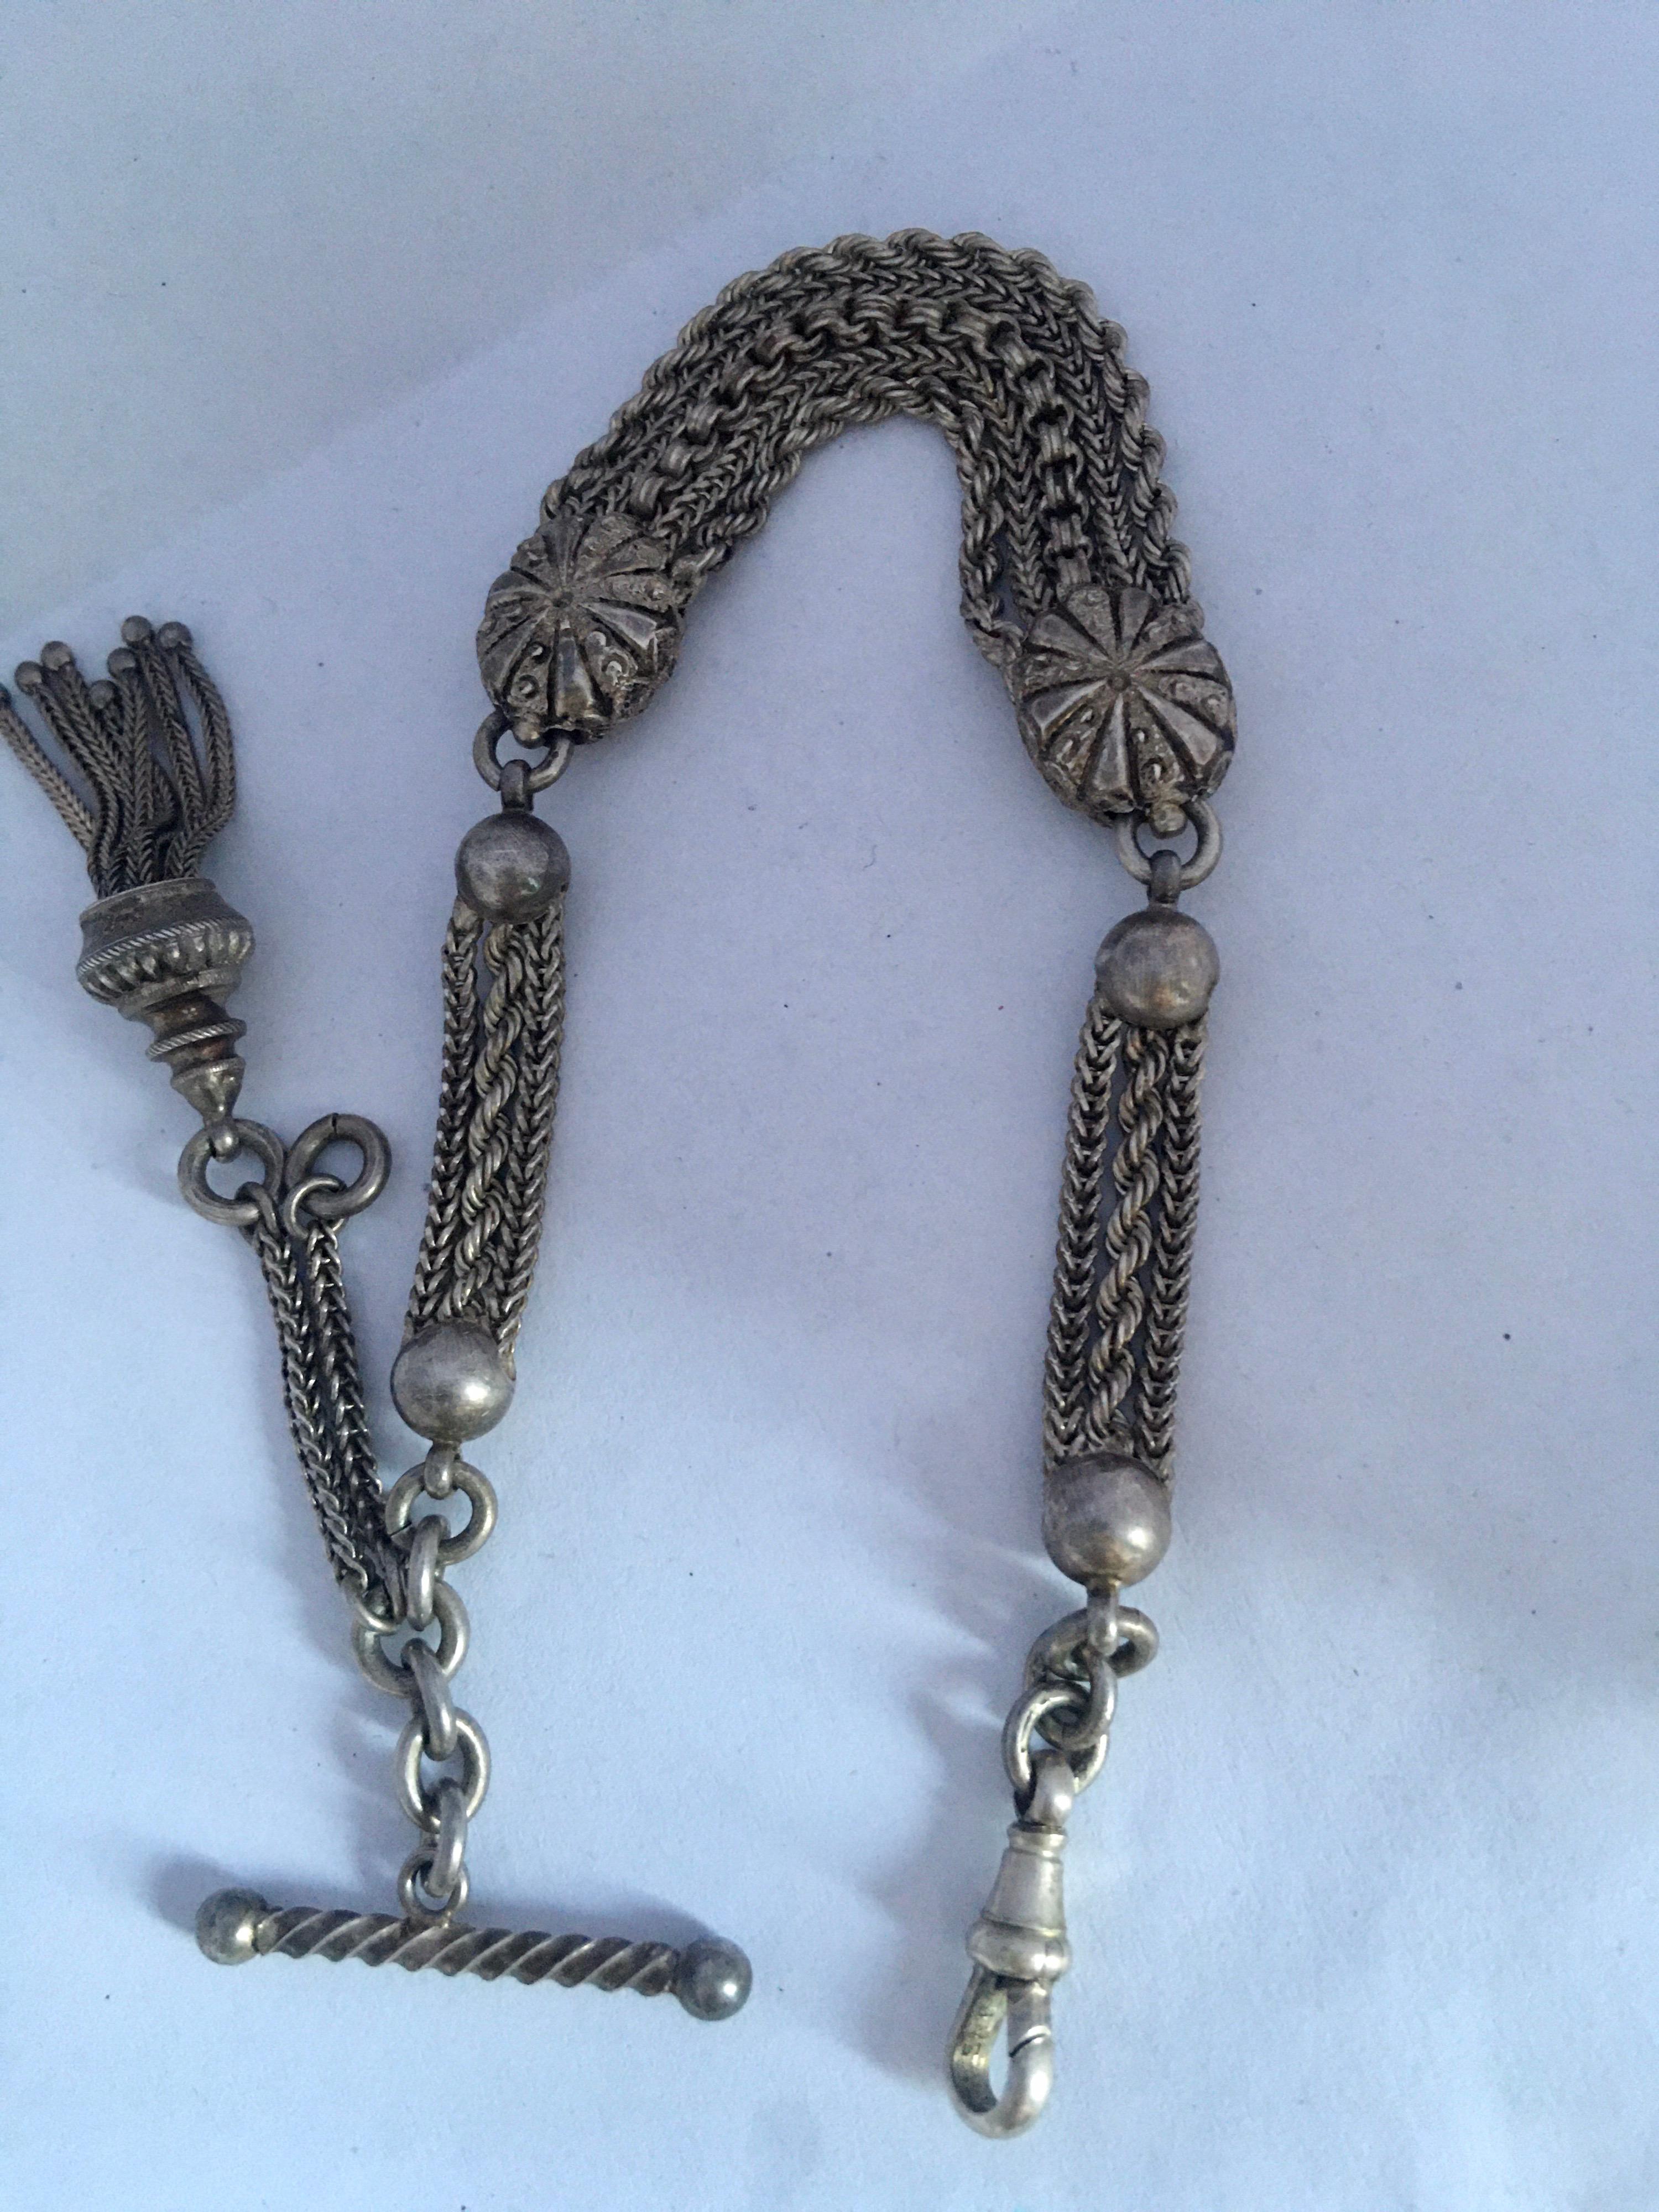 Antique Silver Ornate Pocket Watch Chain 4